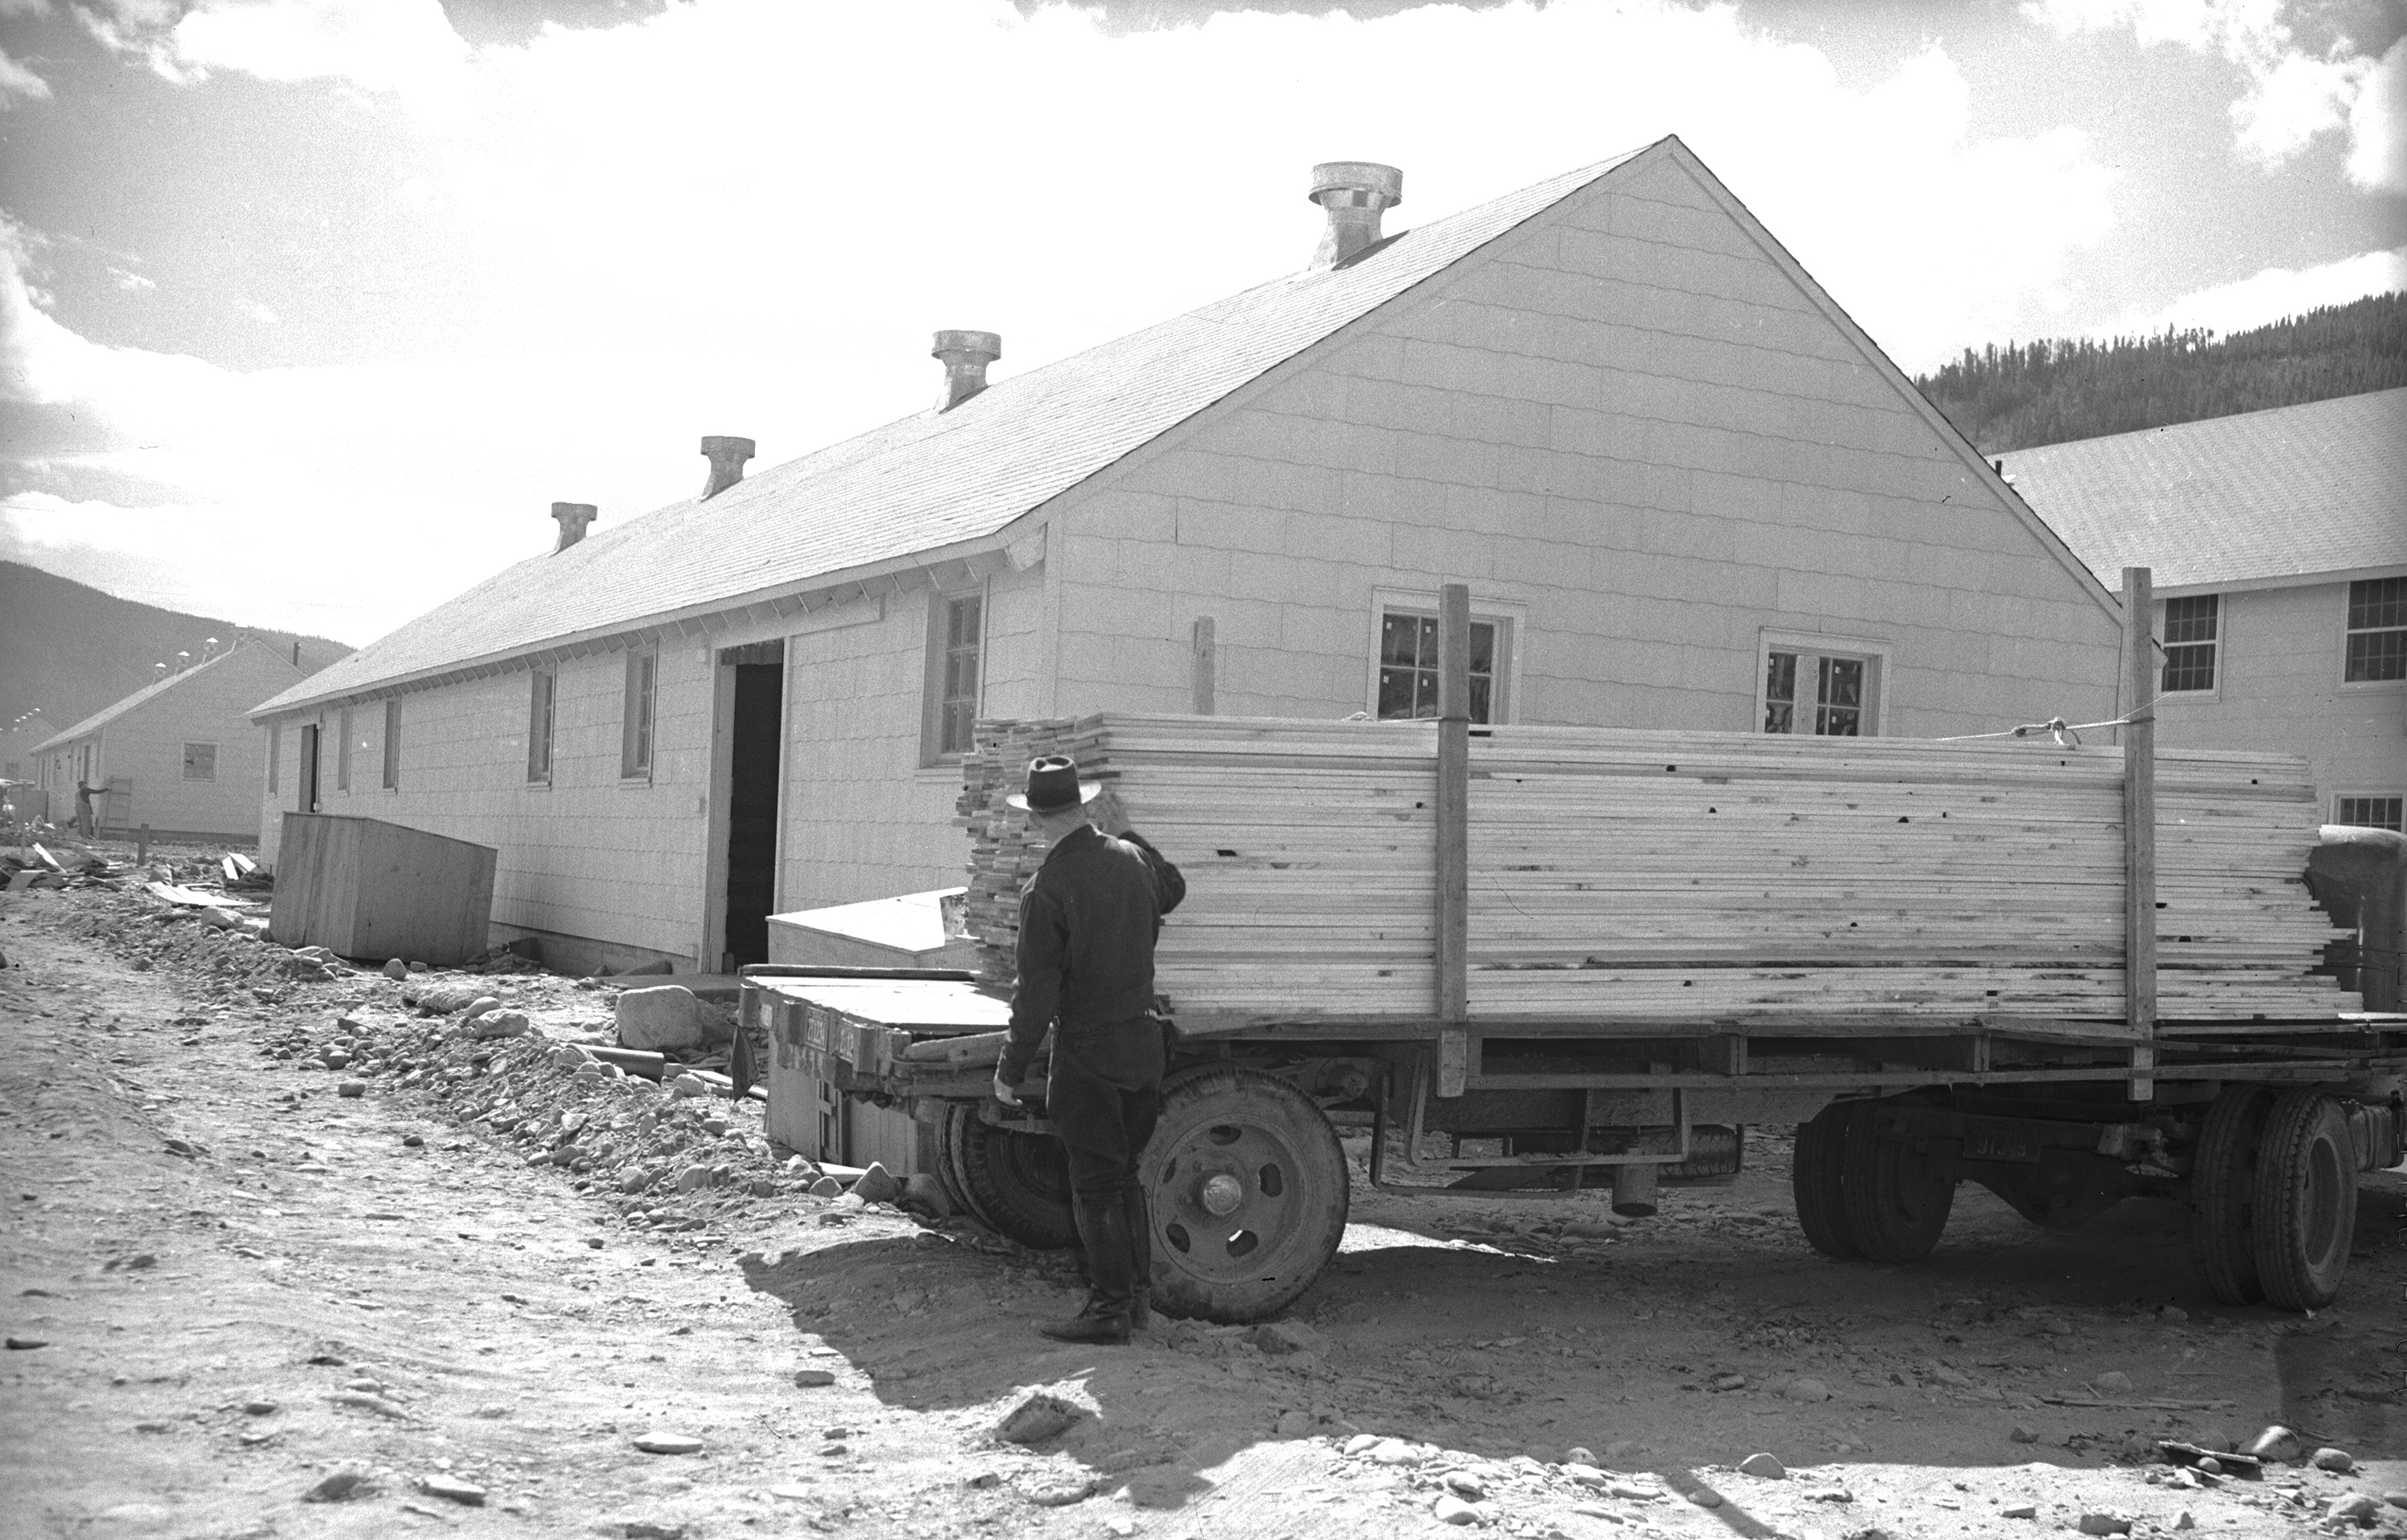 A truck with a load of lumber parked outside a long building.